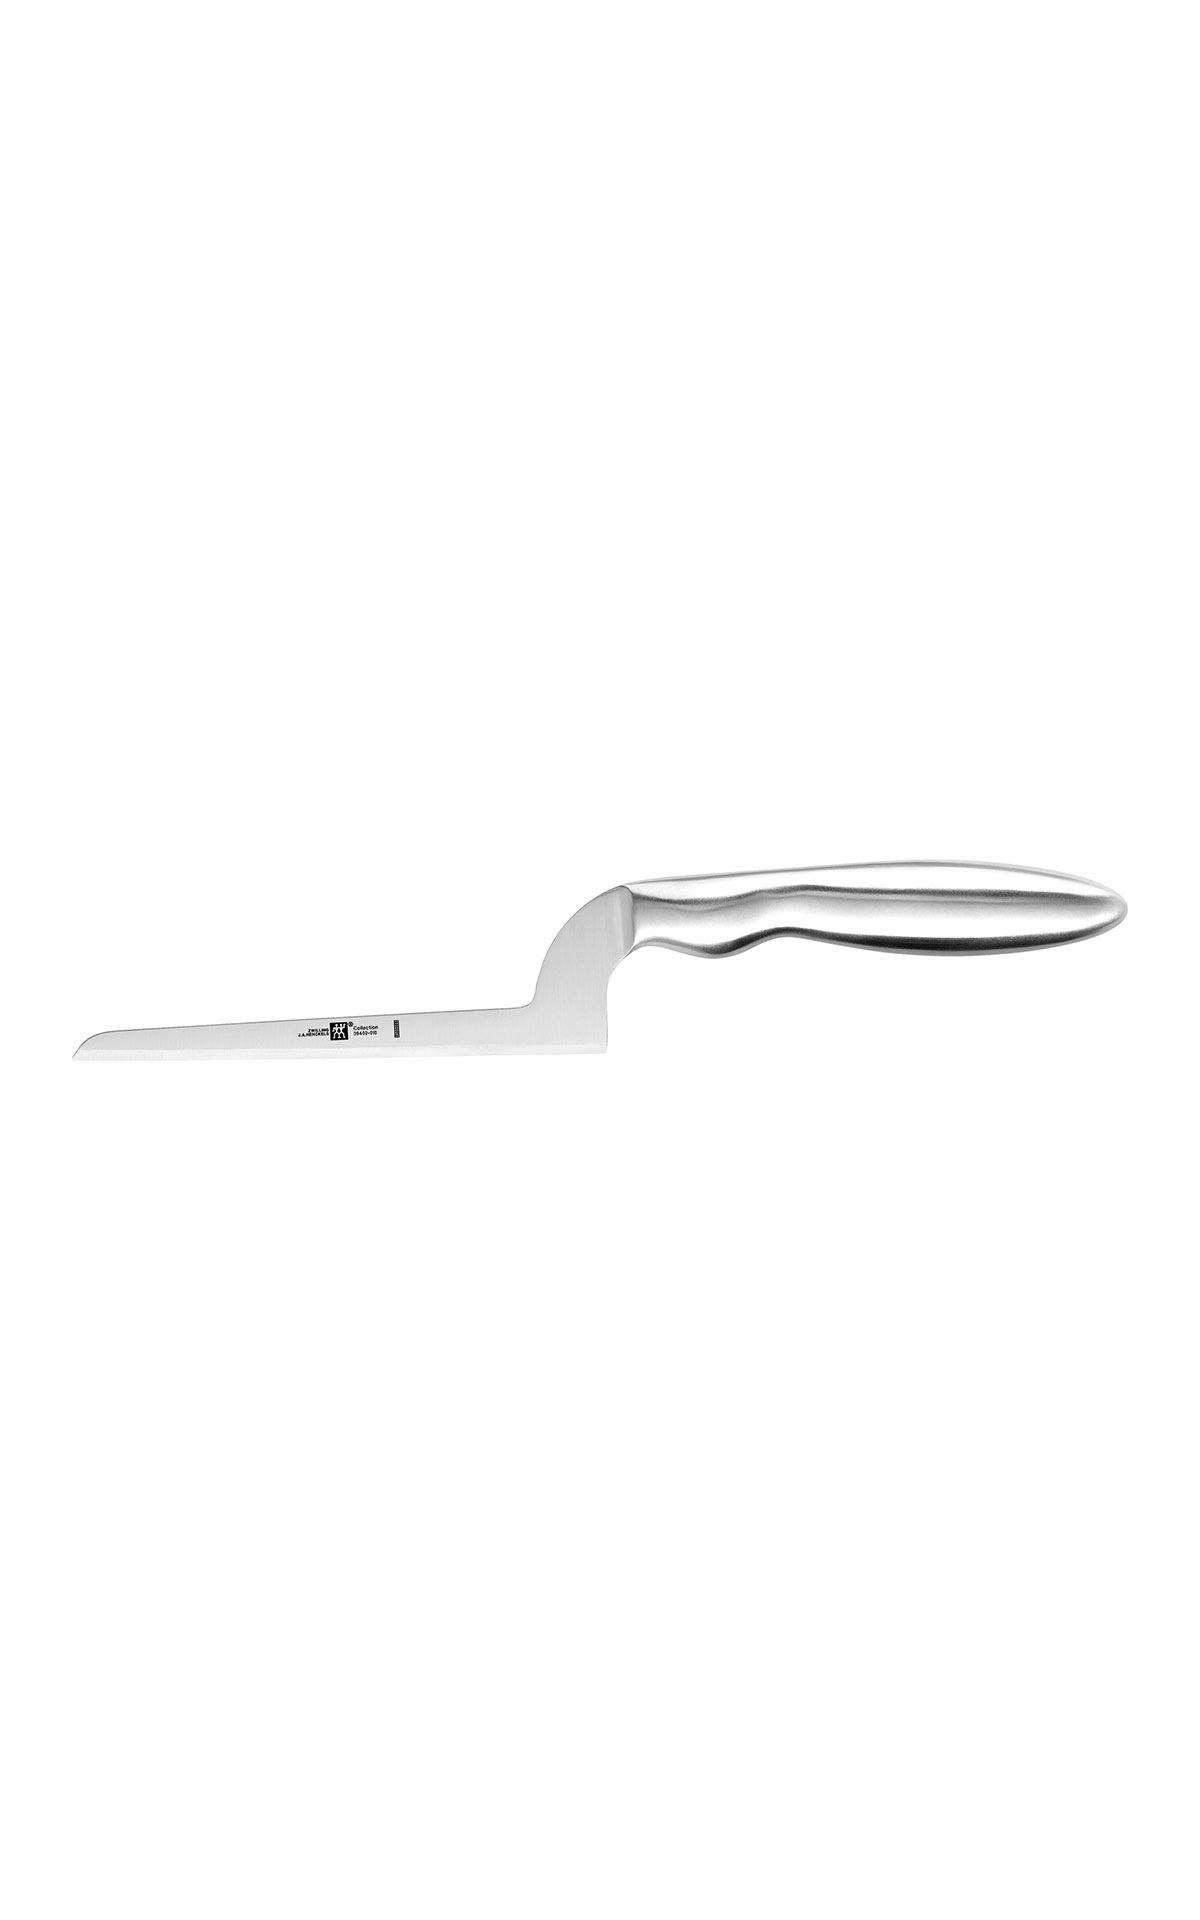 Zwilling Cheese knife 2 from Bicester Village